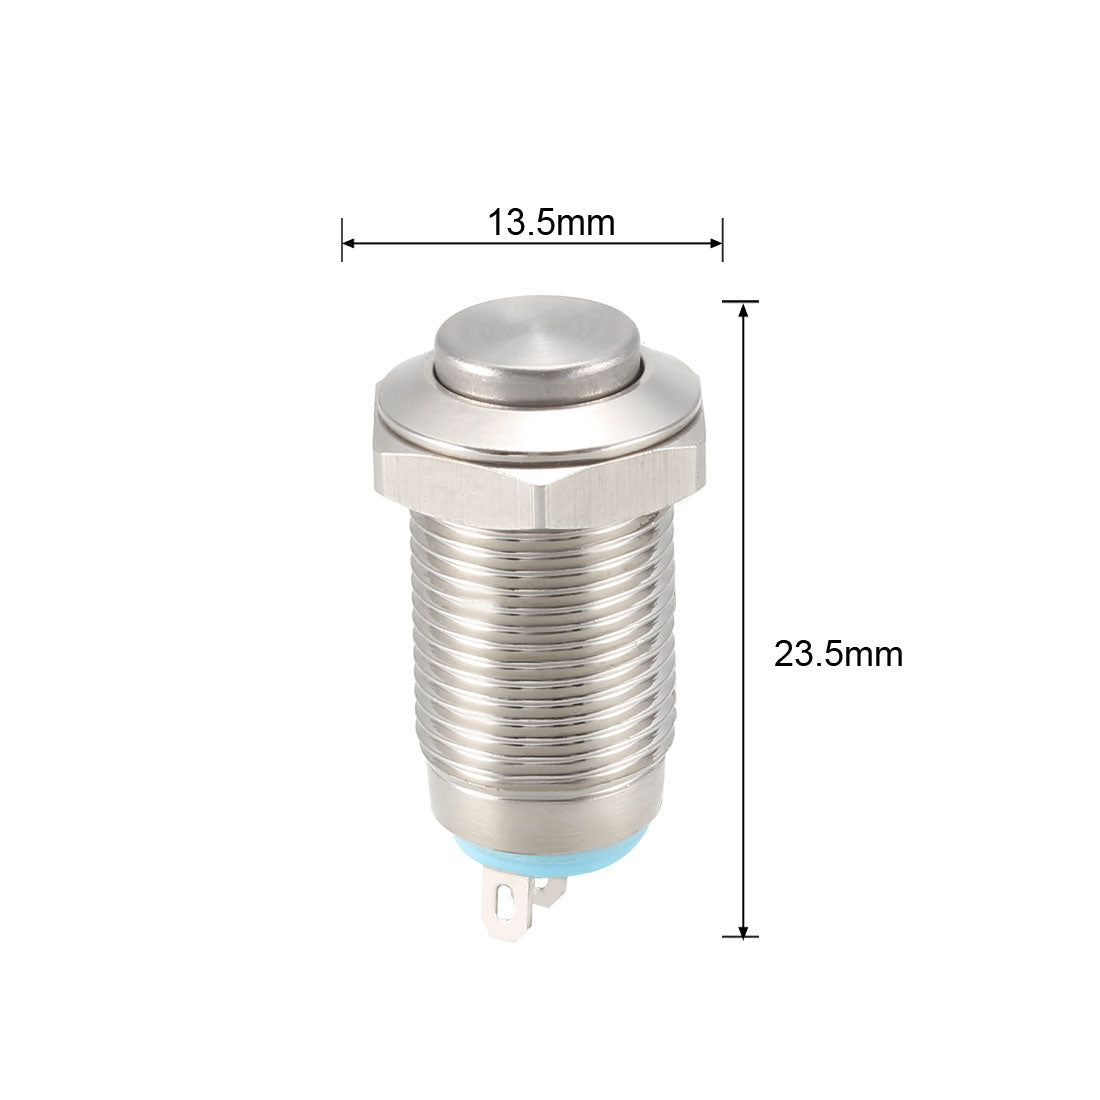 uxcell Uxcell Latching Metal Push Button Switch 10mm Mounting Dia 1NO 1NC COM DC 30V 0.1A 23.5 x 13.5mm